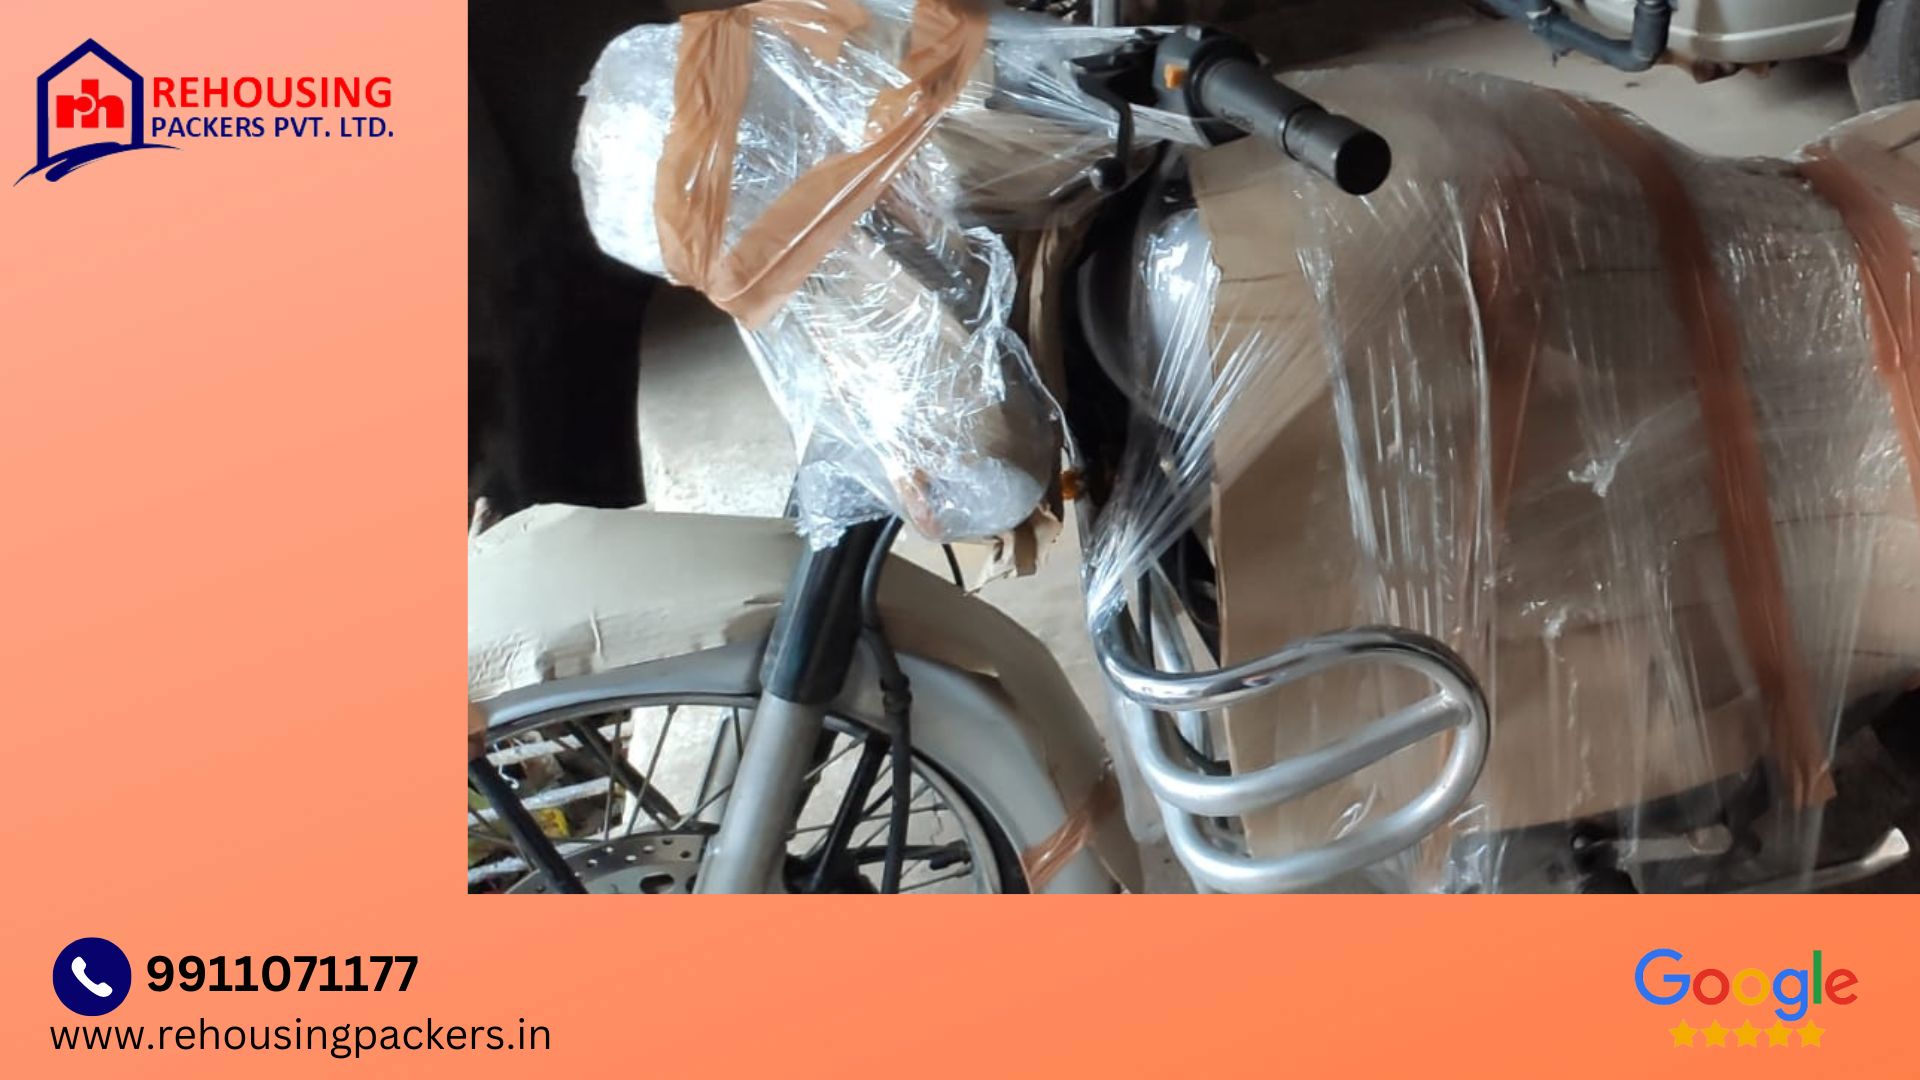 our courier services from Coimbatore to Salem